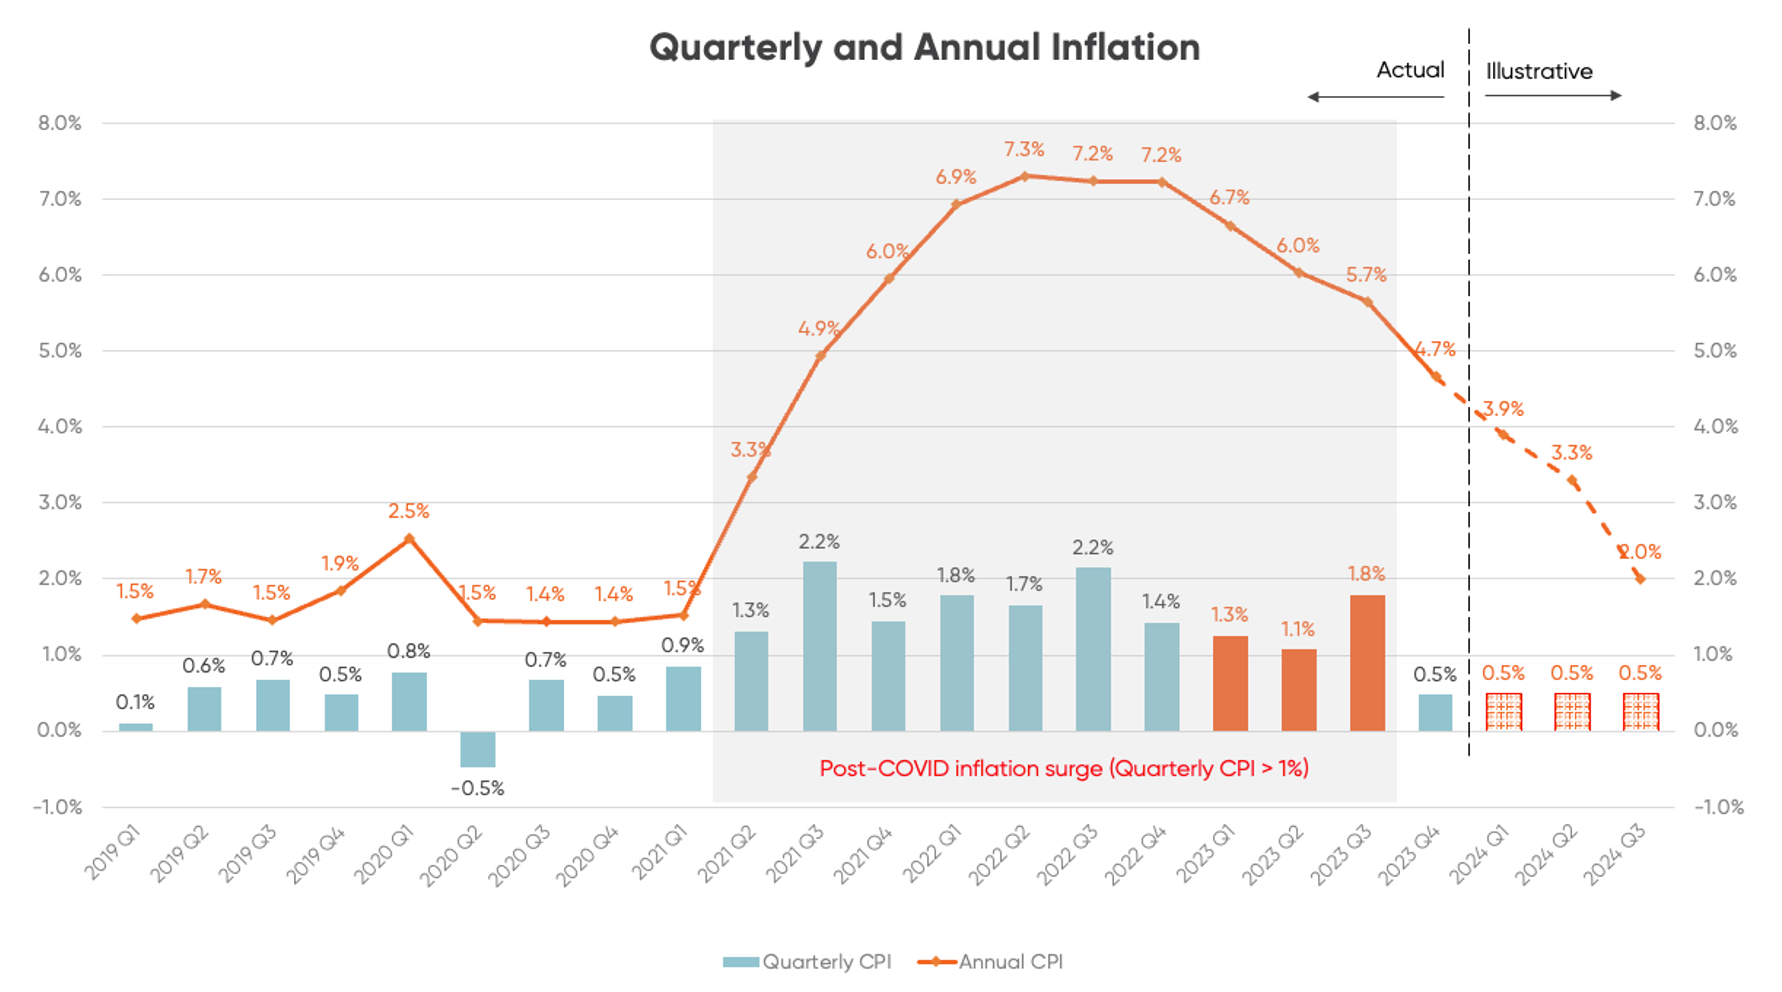 Graph tracking NZ's CPI inflation data from Q1 2019 through to today, with projected data out to Q3 2024